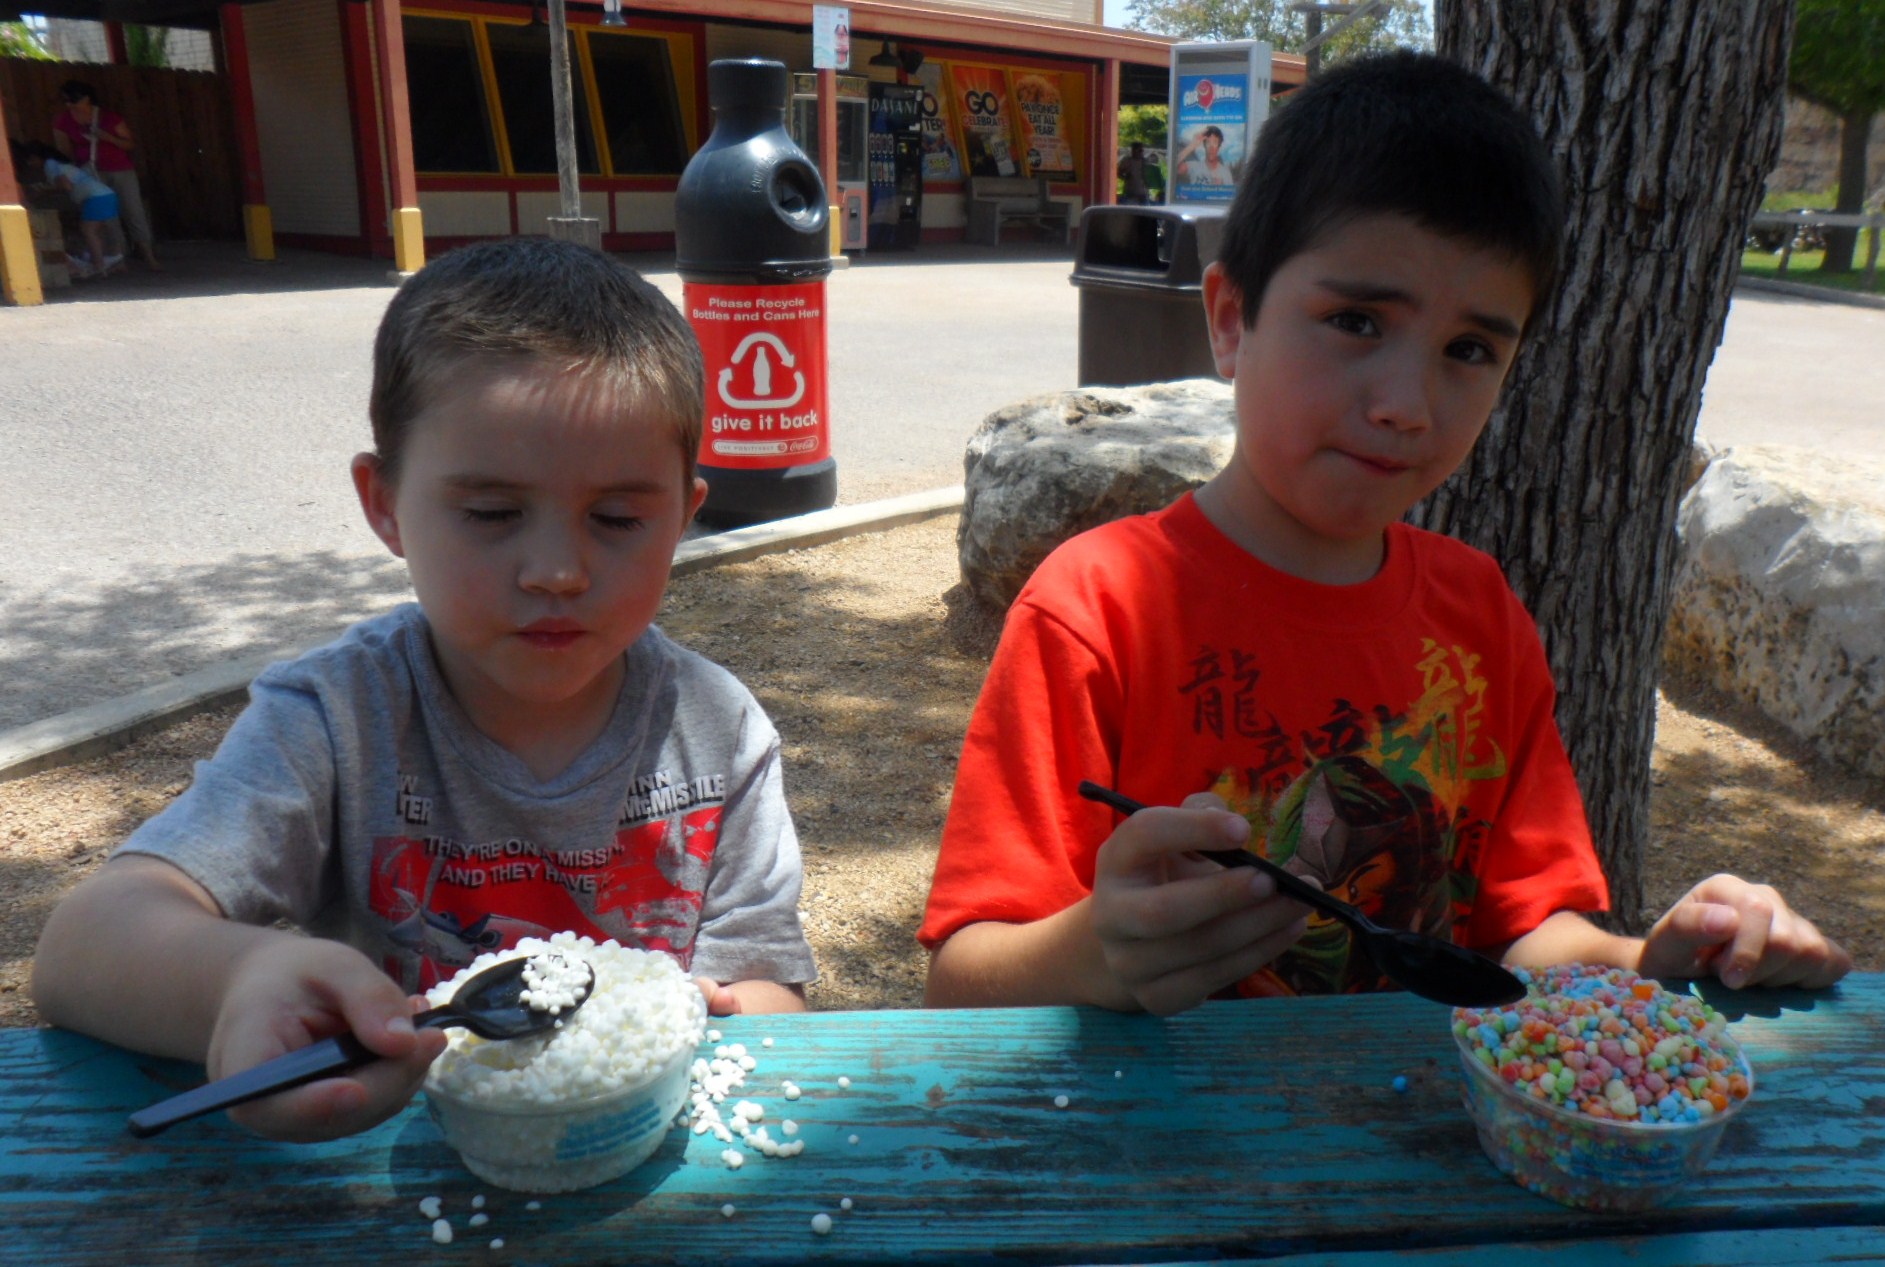 My Dippin' Dots pictures aren't great...Connor is making a funny face and JT has his eyes closed.